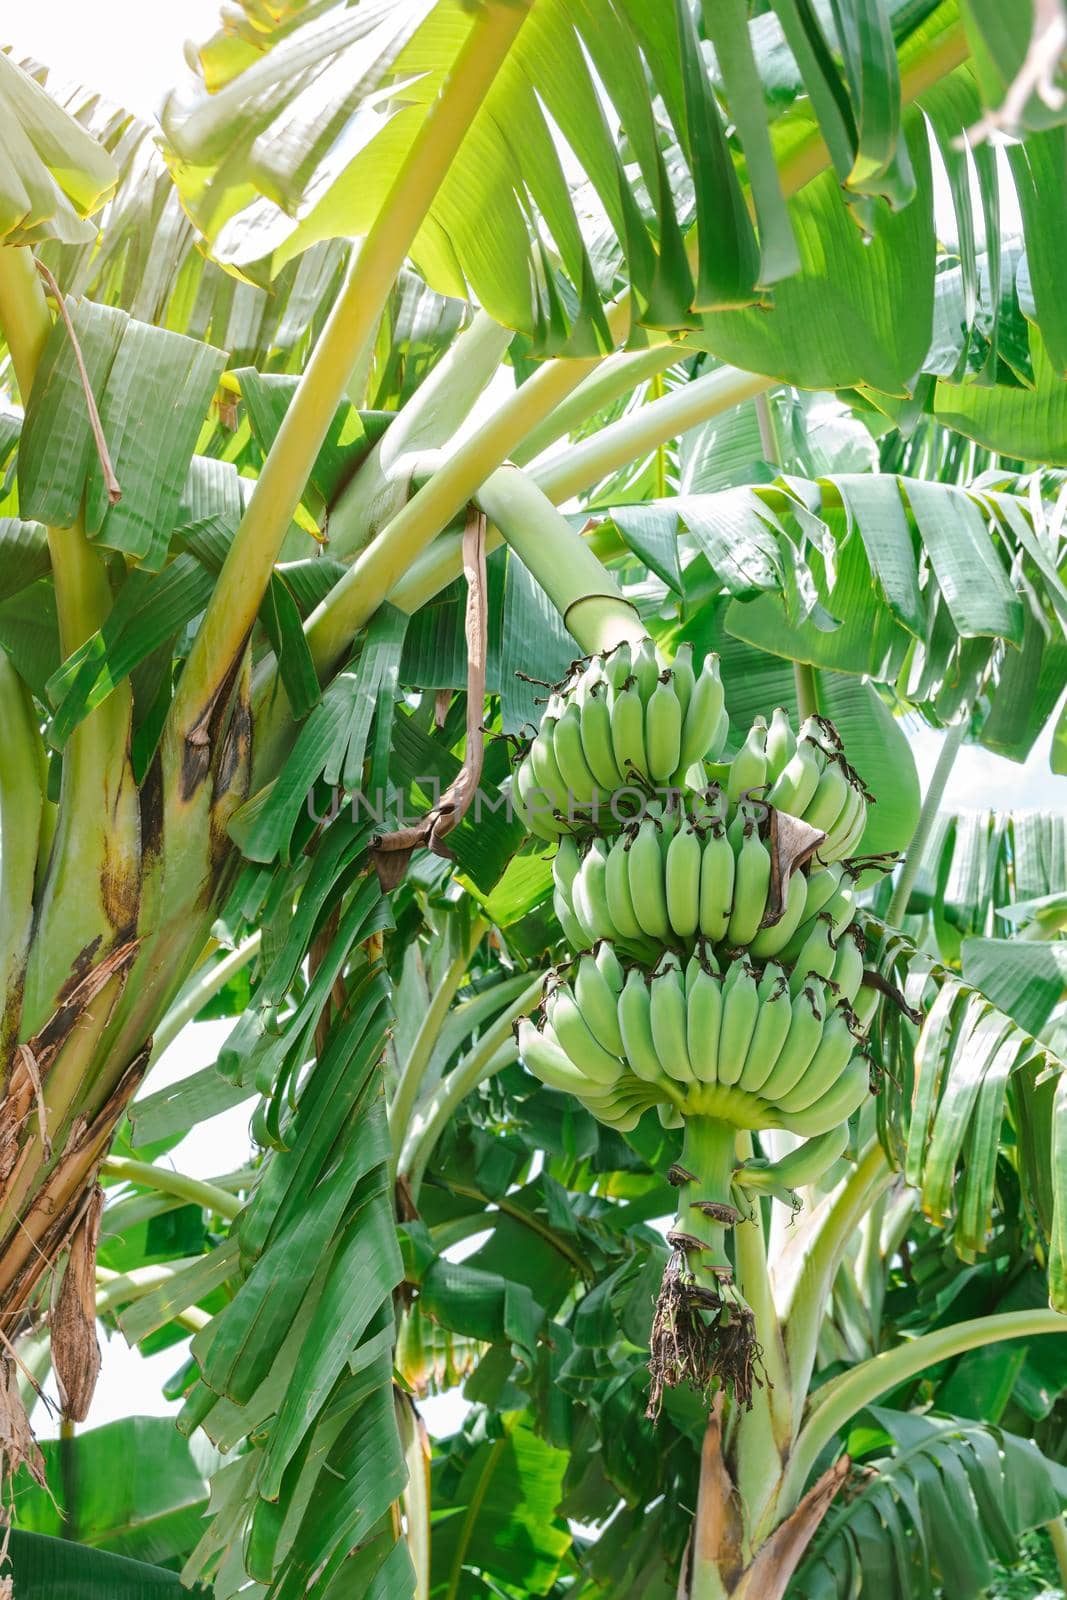 Group of green unripe bananas that are gathered on the same branch.